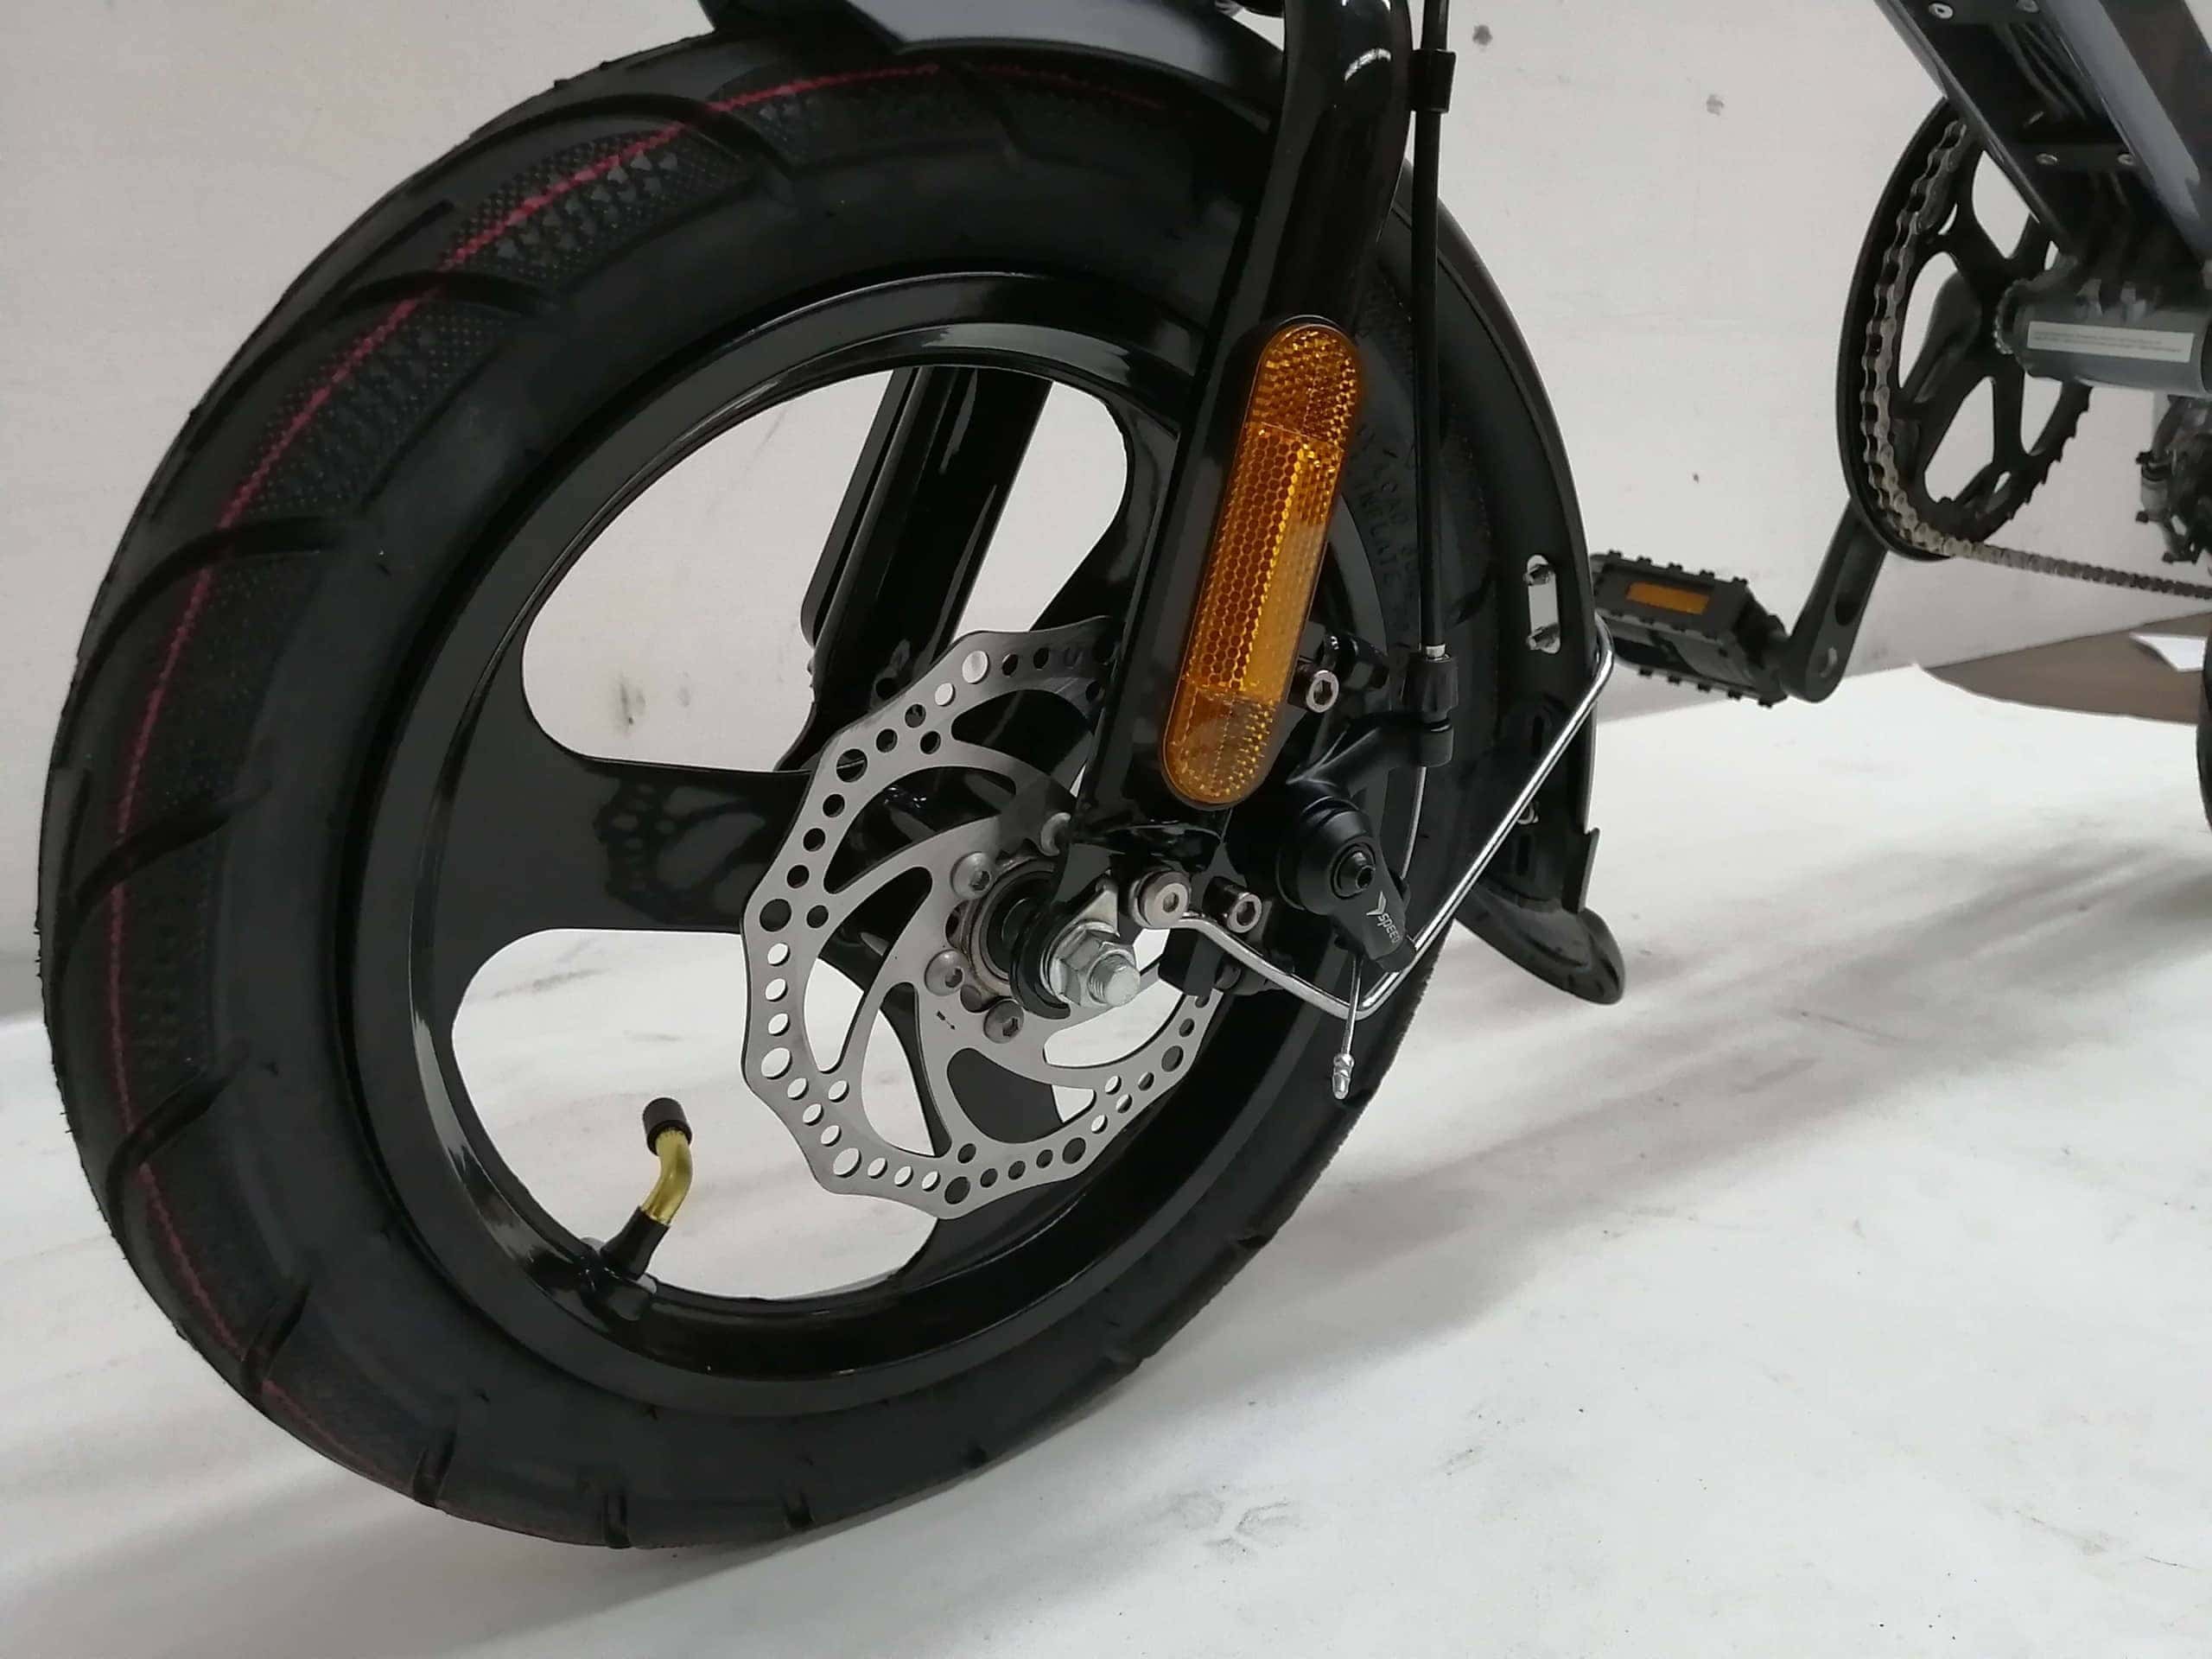 JI MOVE LTA approved ebike tyres scaled - Review of JI-MOVE LC, the most compact LTA approved ebike?